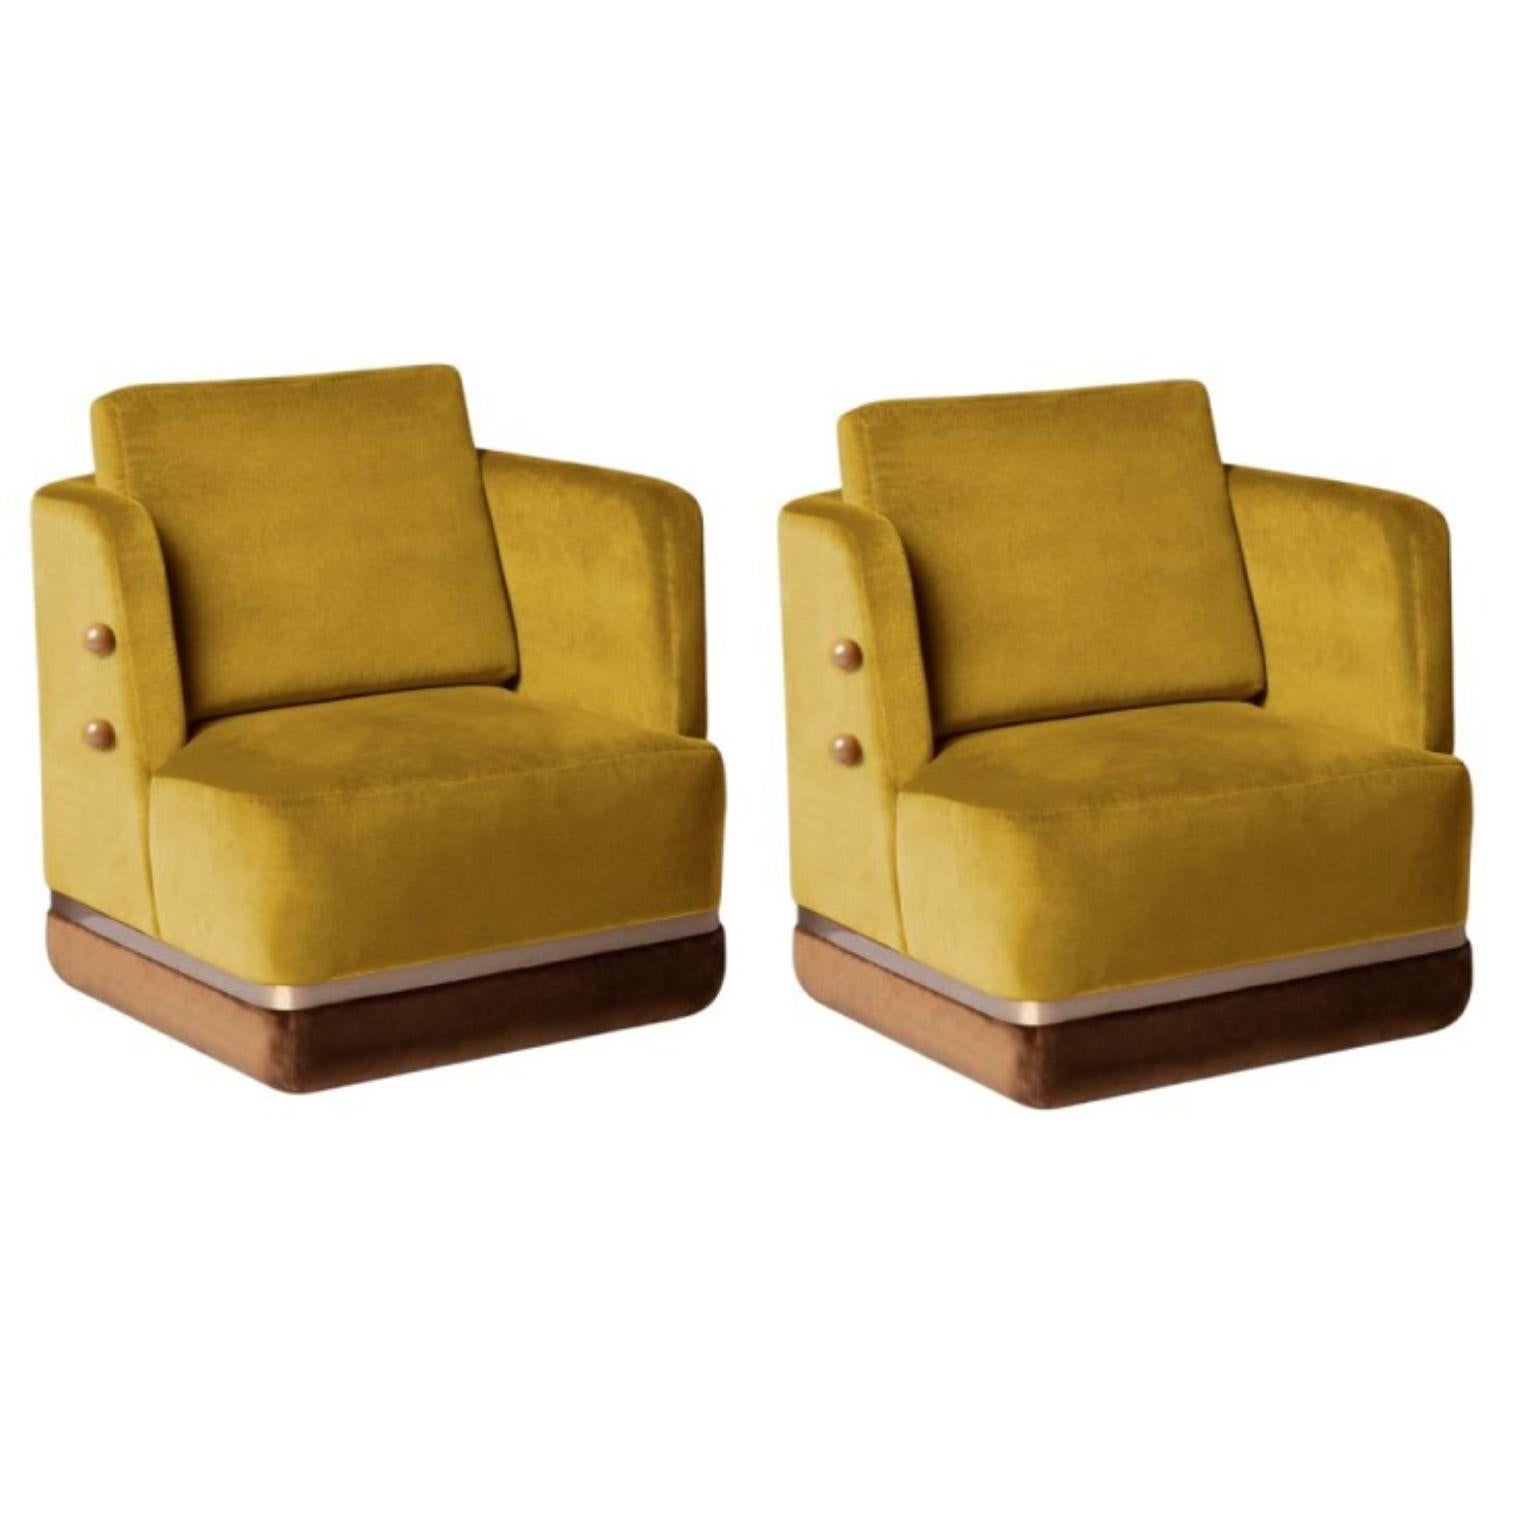 Set of 2 Panorama armchairs by Dooq.
Materials: Lacquered MDF, fabric, leather, stainless steel.
Dimensions: W 69 x D 73 x H 86 cm.

Dooq is a design company dedicated to celebrate the luxury of living. Creating designs that stimulate the